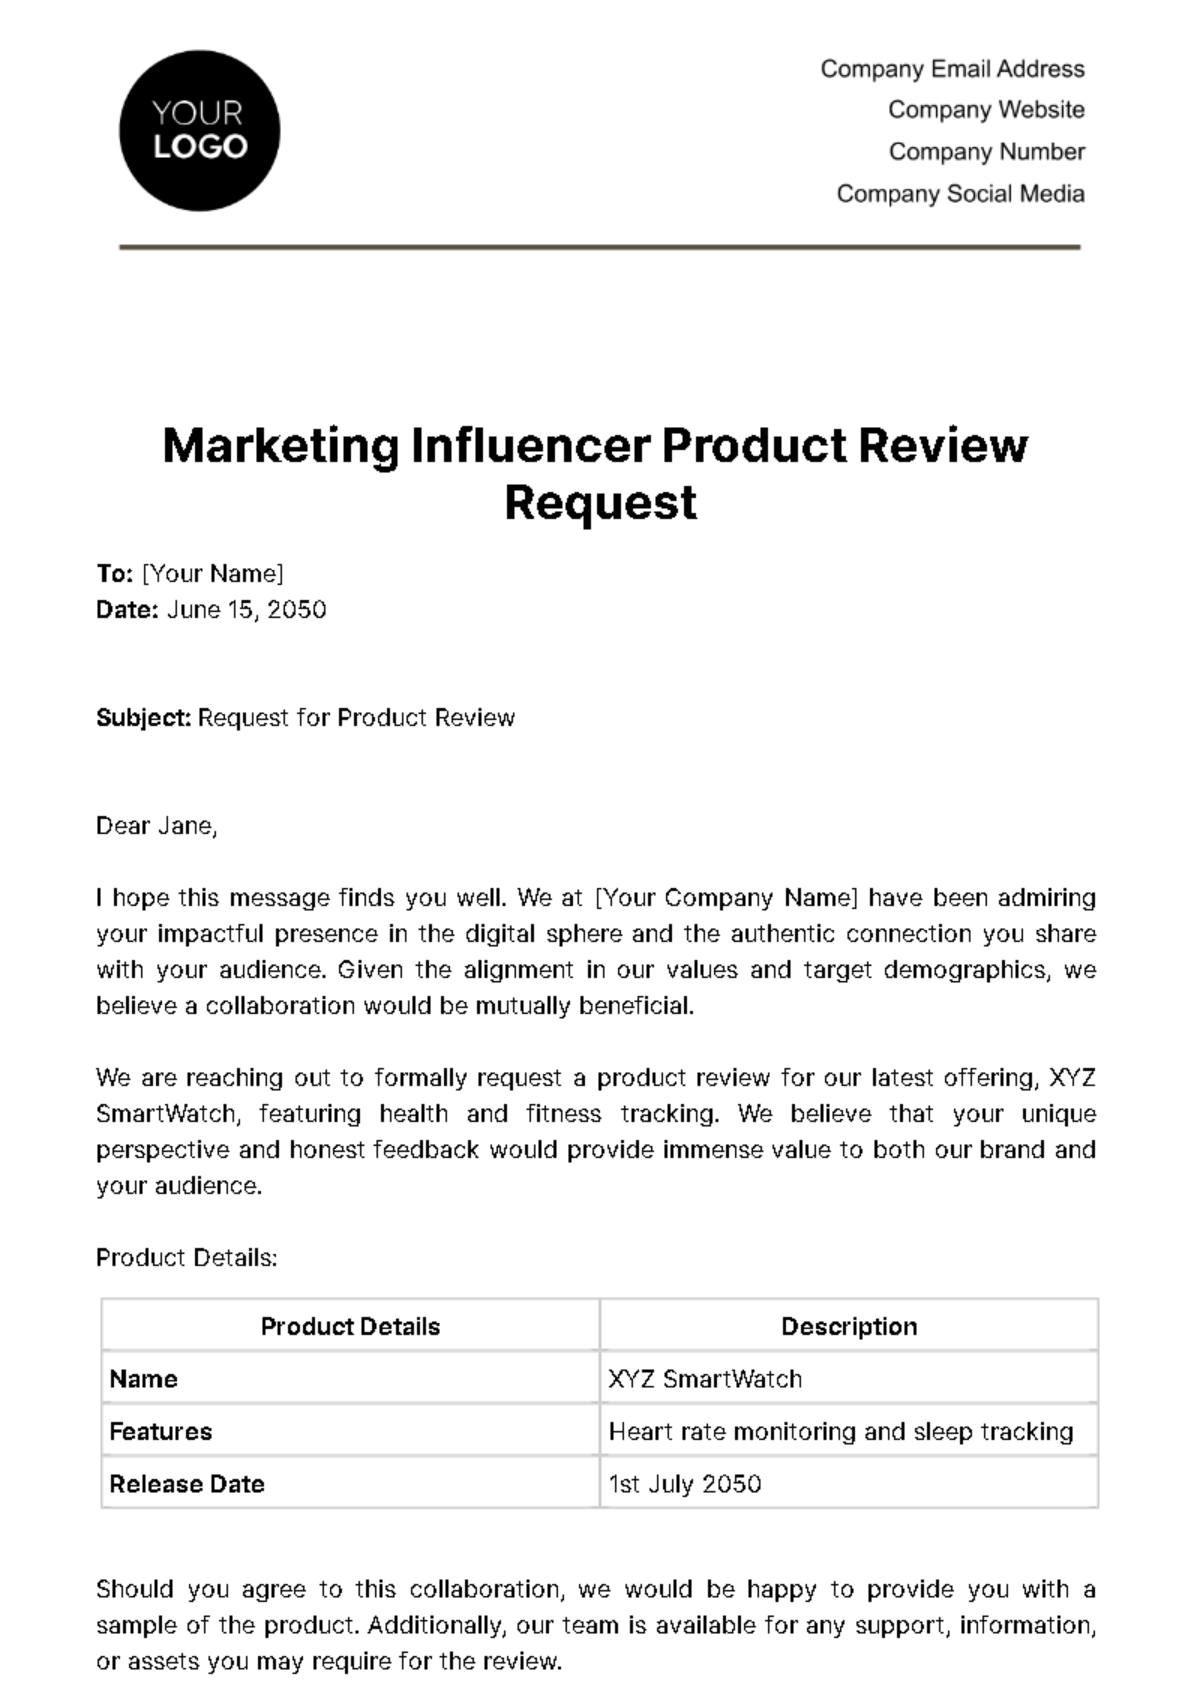 Free Marketing Influencer Product Review Request Template